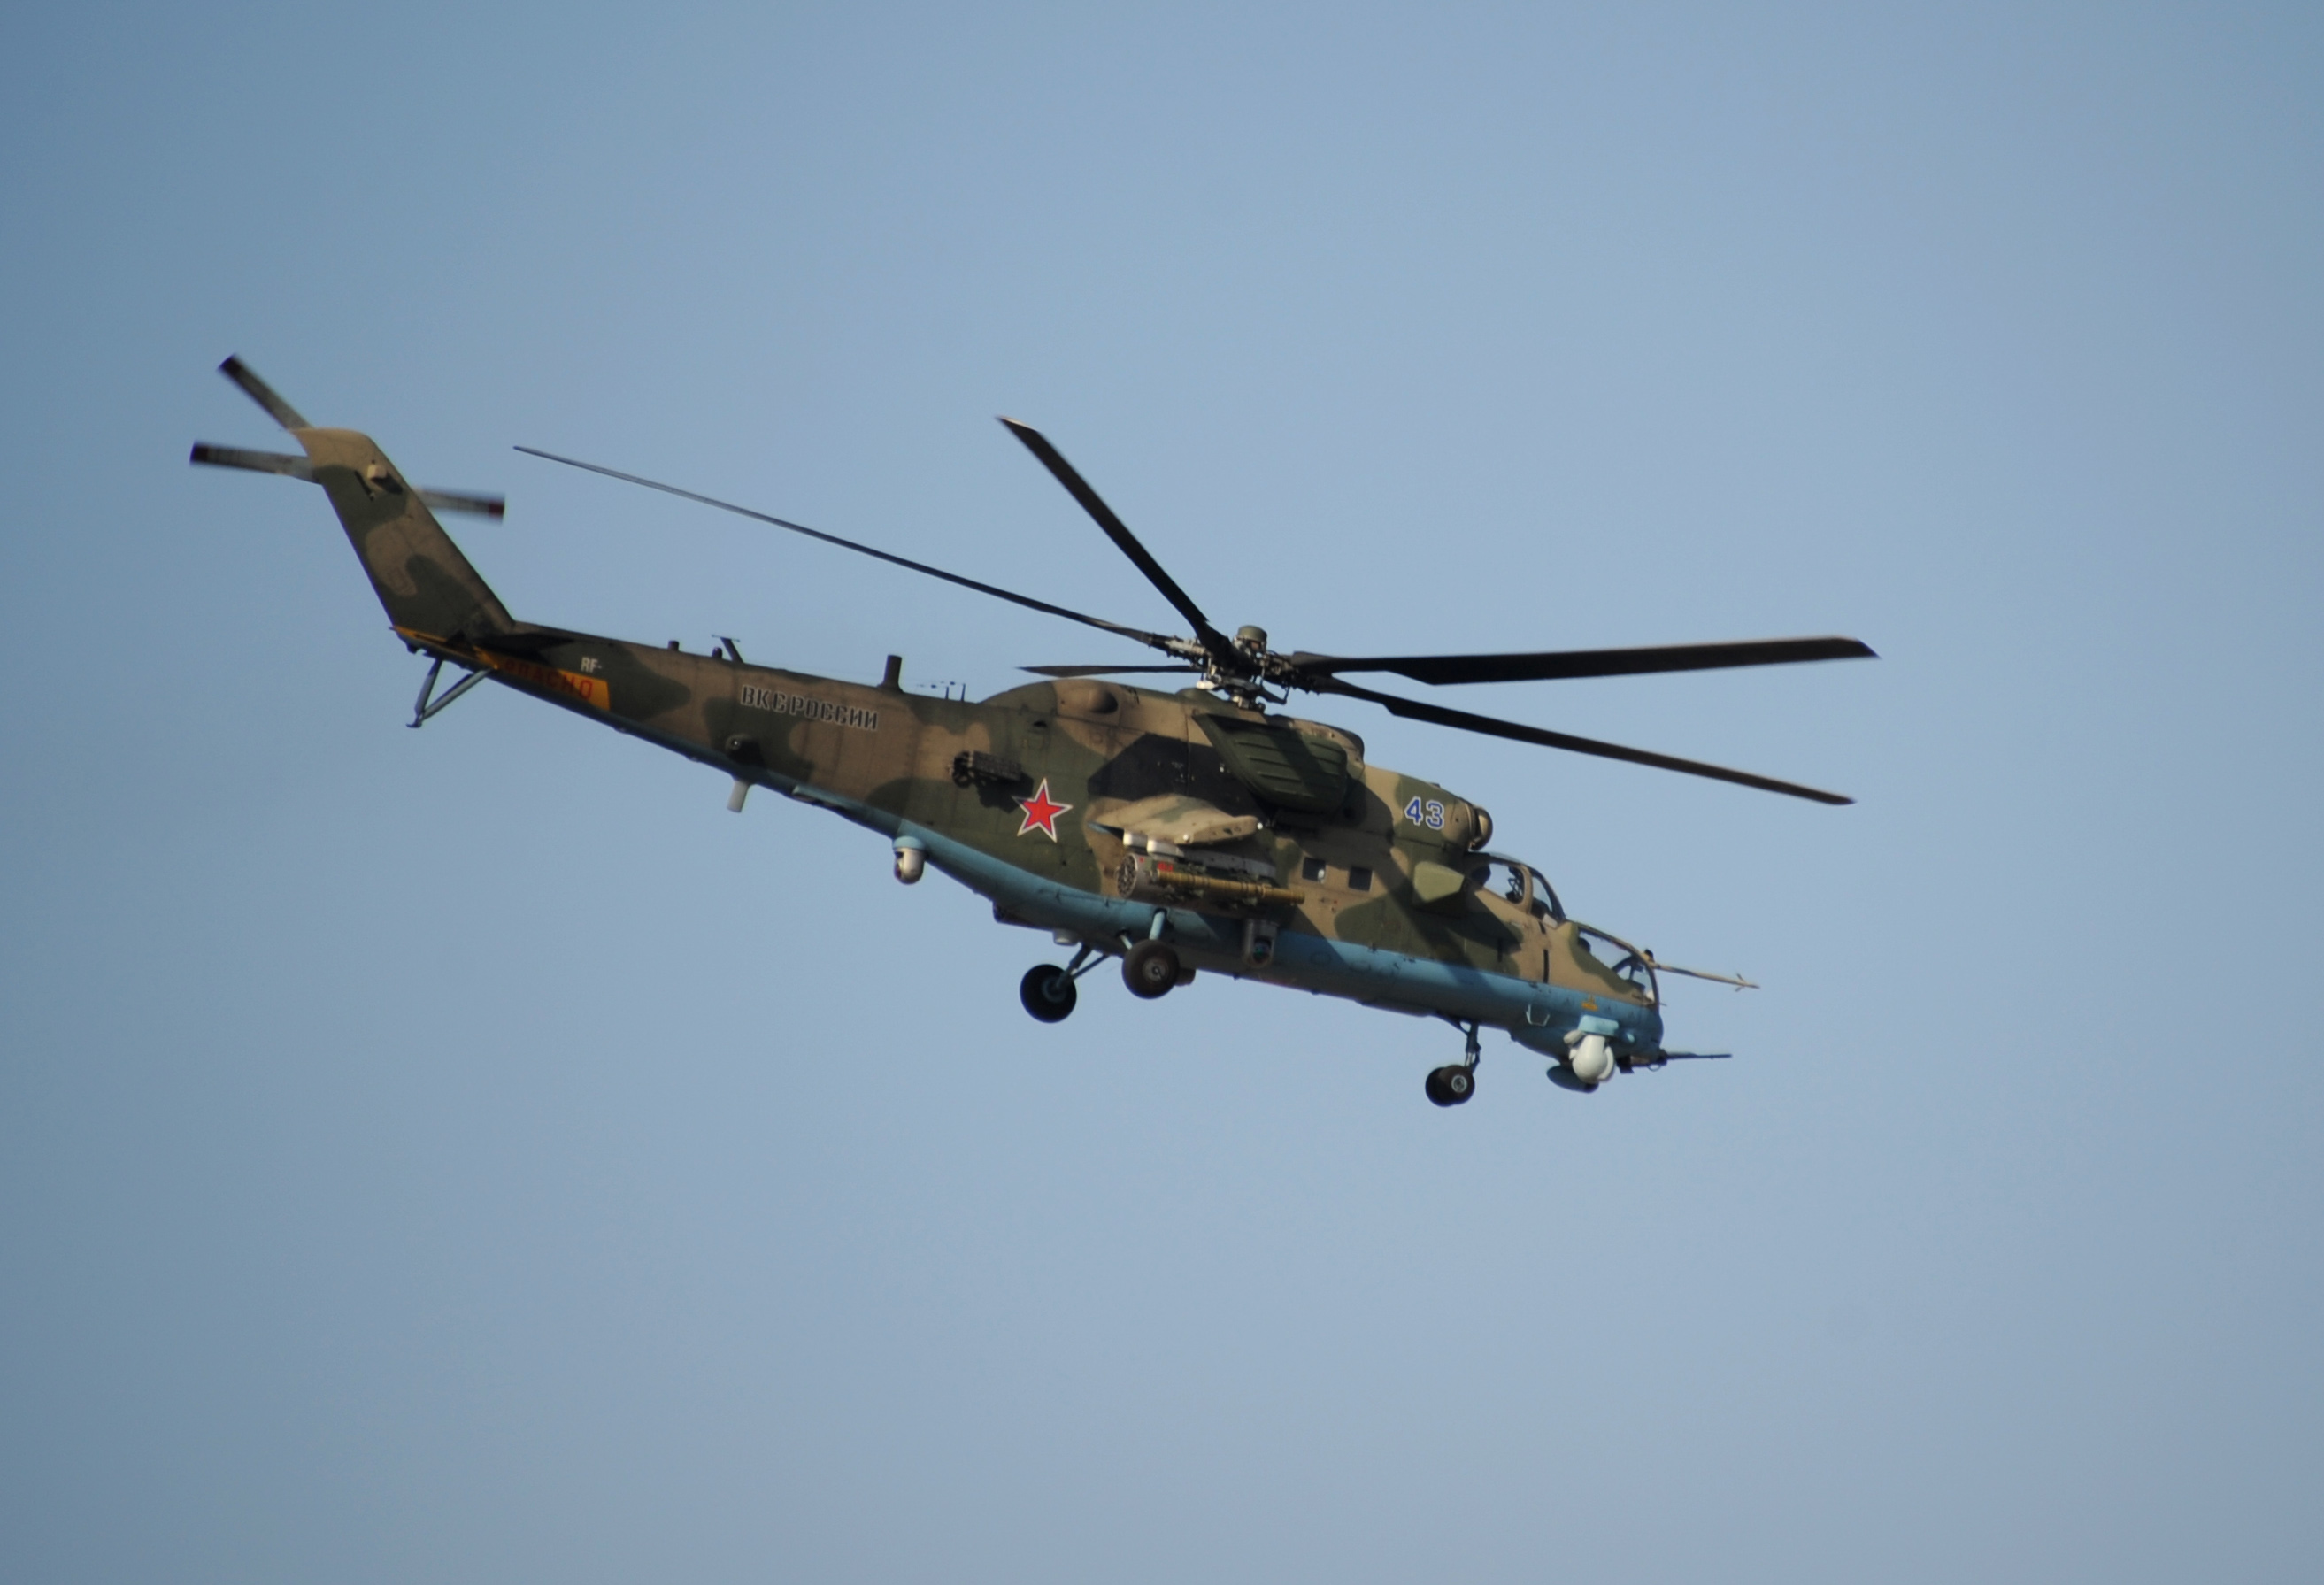 Ukraine air force destroys Russian Mi-24 helicopter, ammo depot—Kyiv